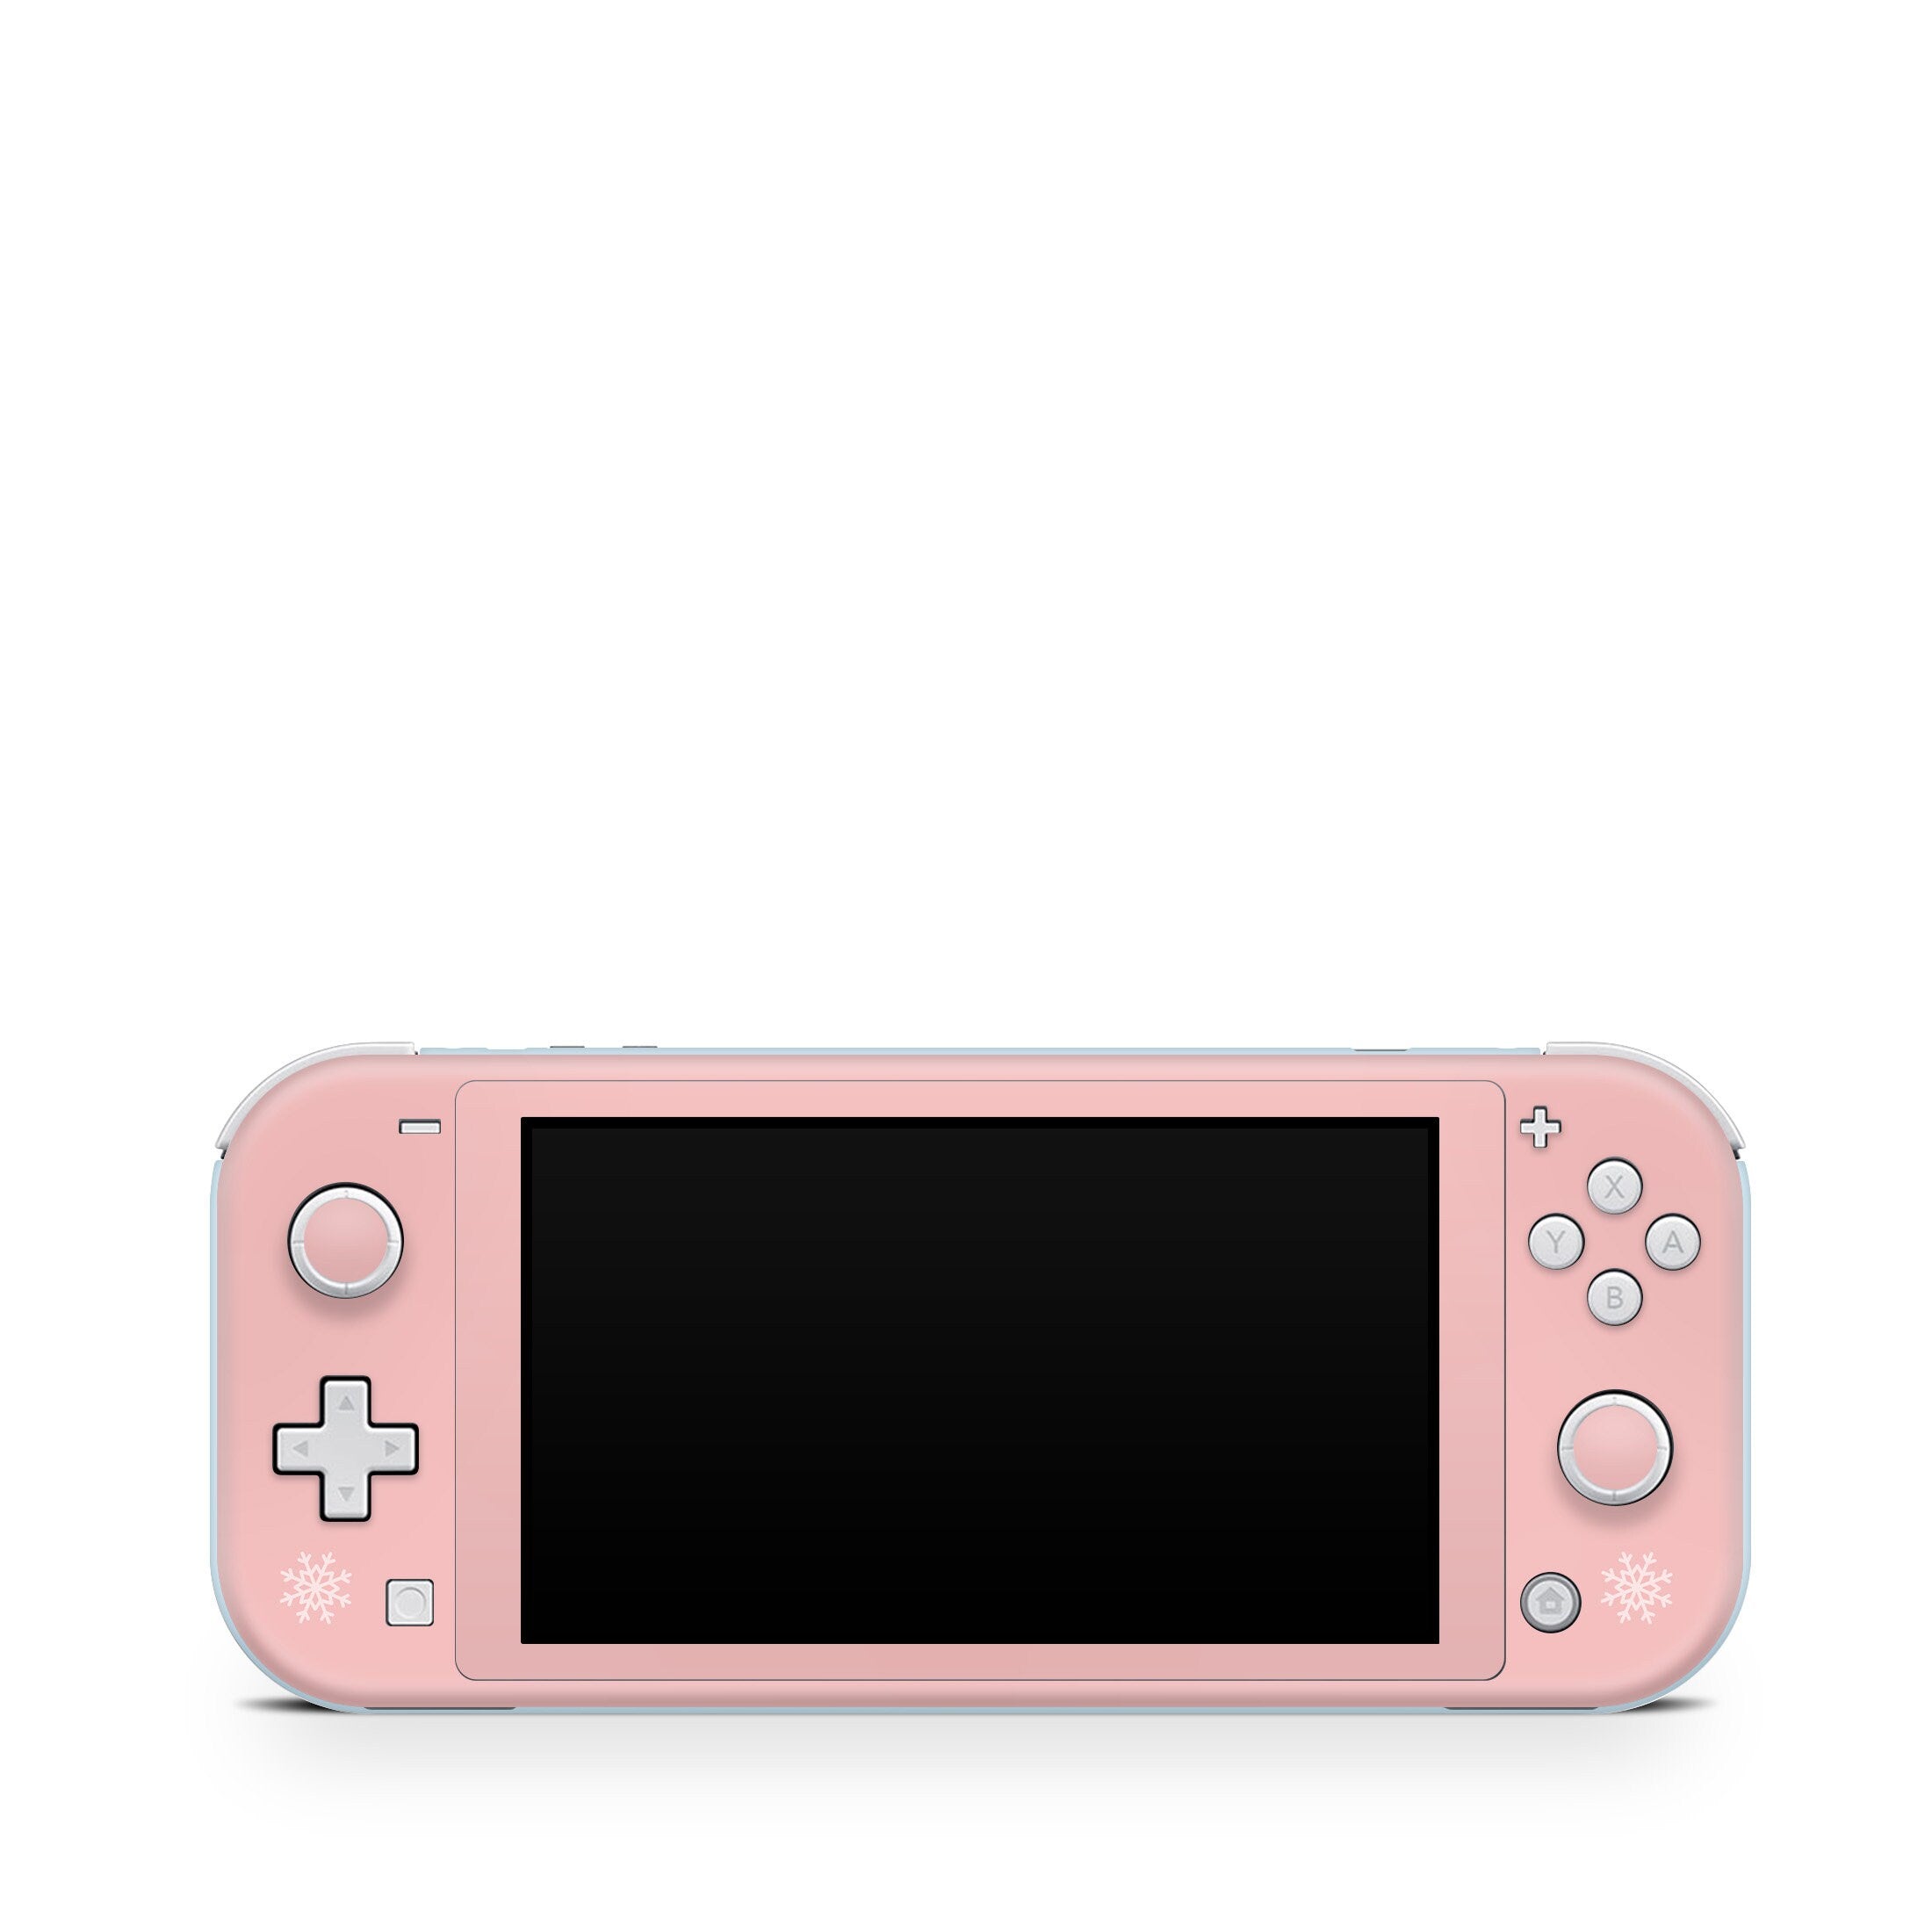 Clearance 70% sale - Christmas Nintendo switch Lite skin anime, Pastel blue switch lite skin Full cover 3m